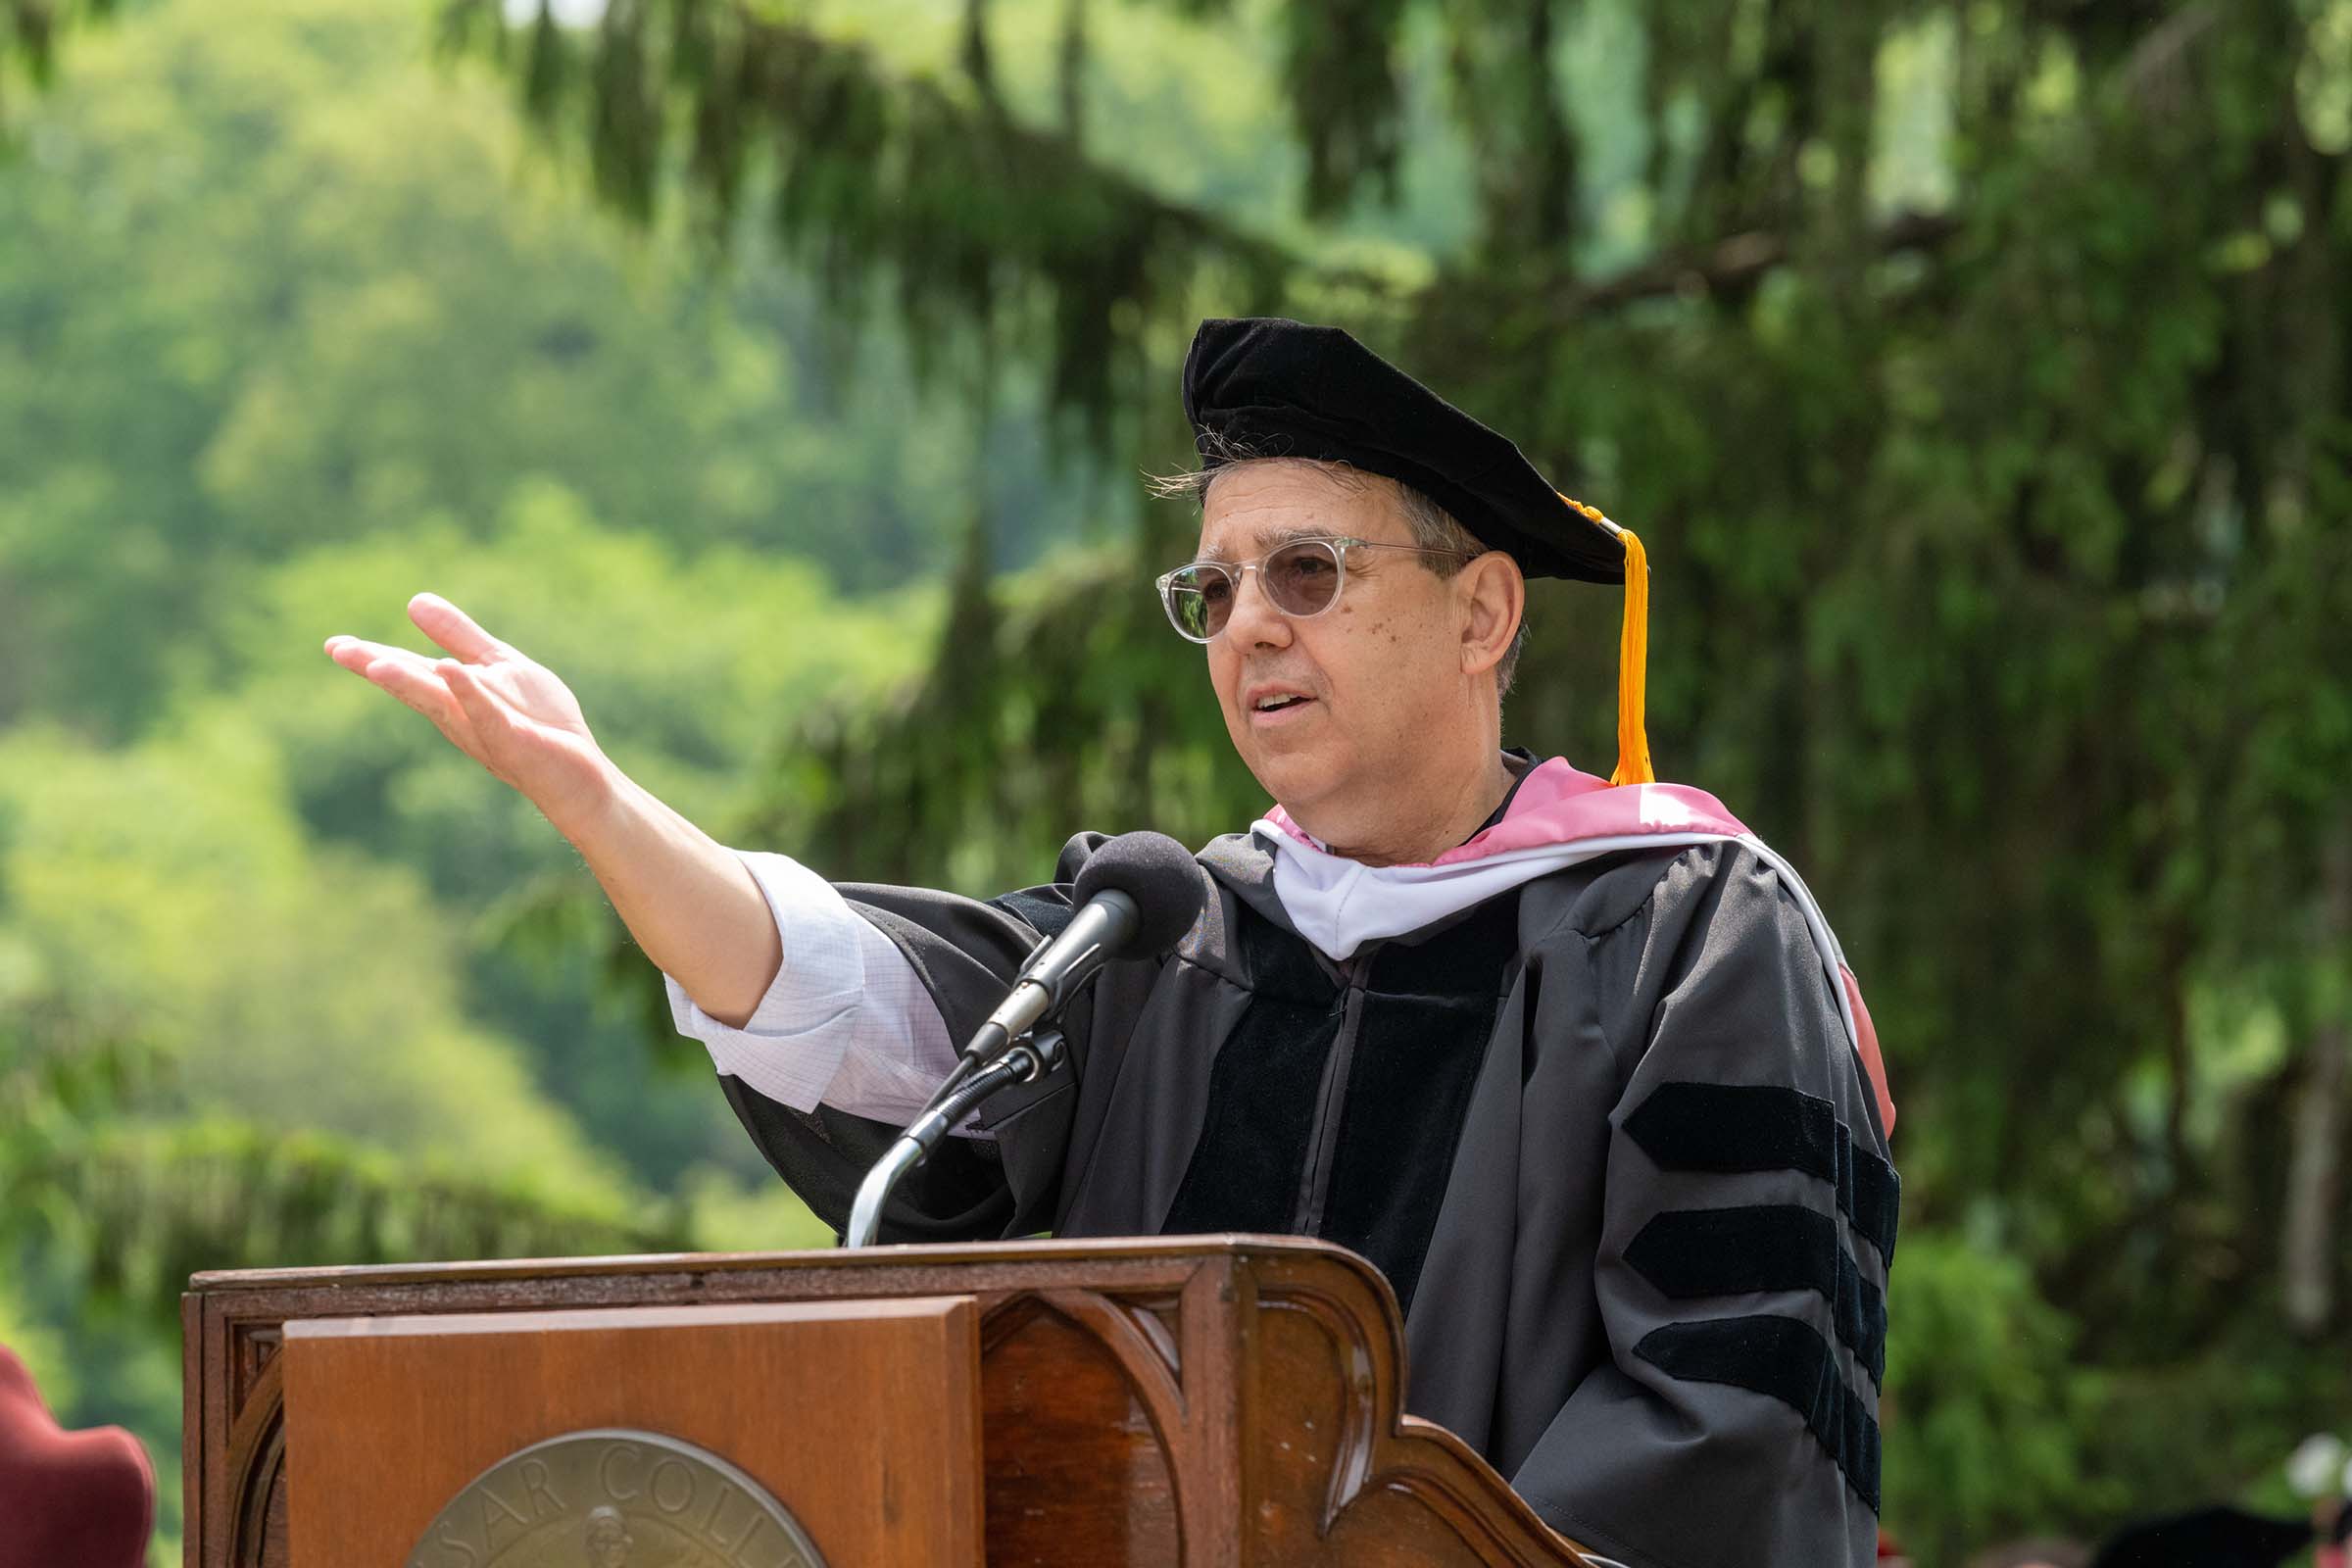 Anthony Friscia ’78, P’15, offered greetings from the Board of Trustees, which he chairs.